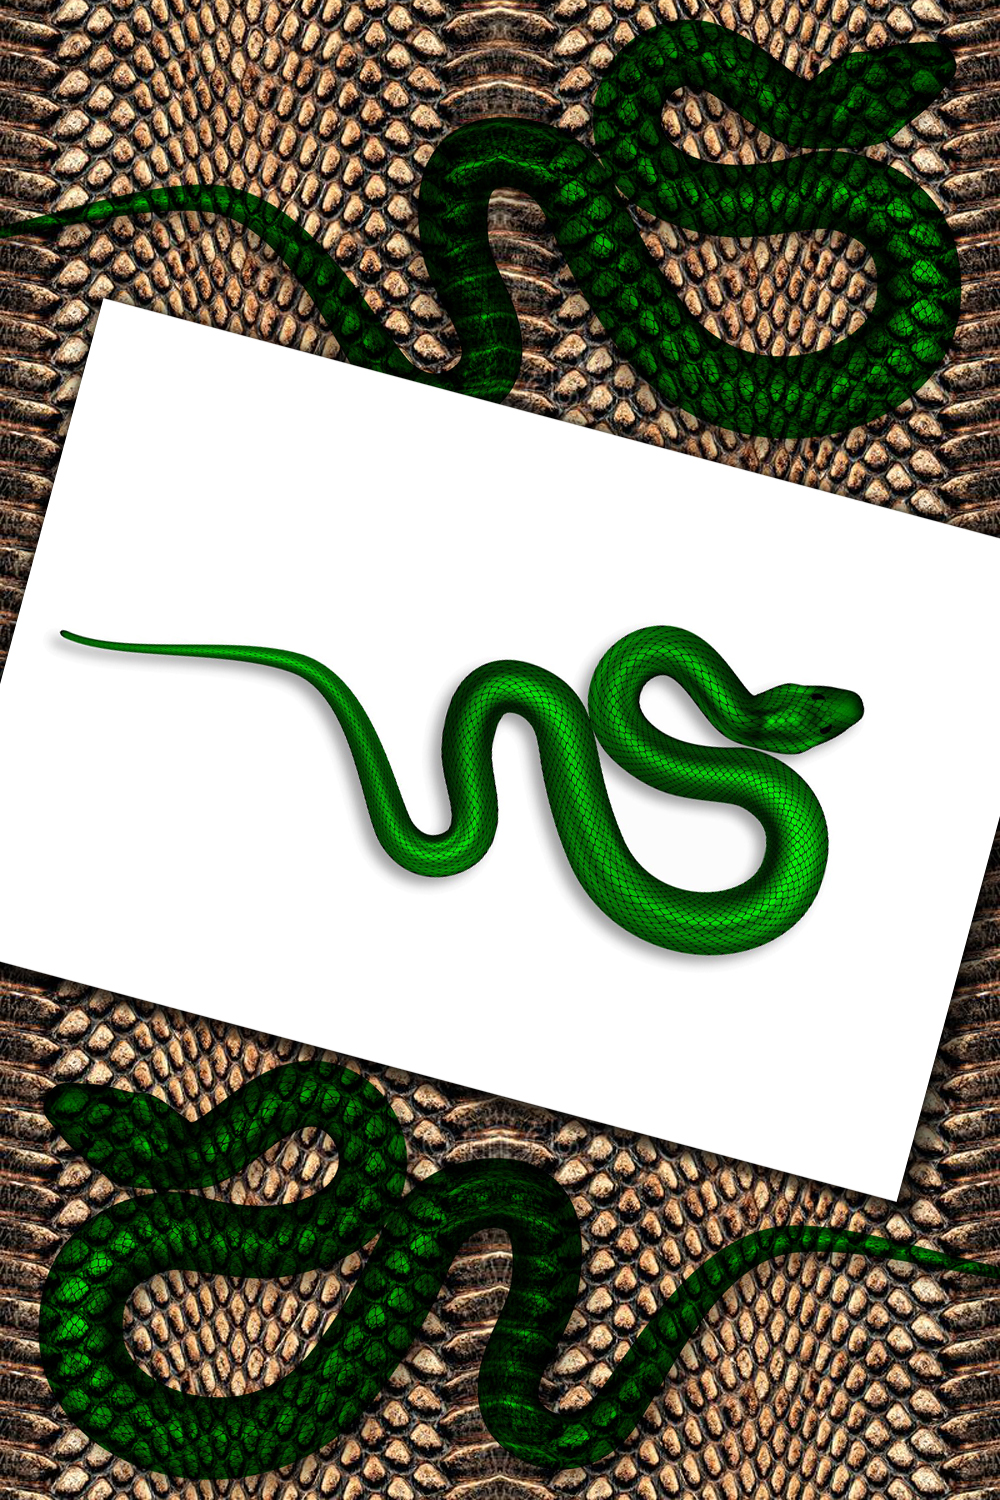 A magnificent image of an ecosite snake on a background of snakeskin.